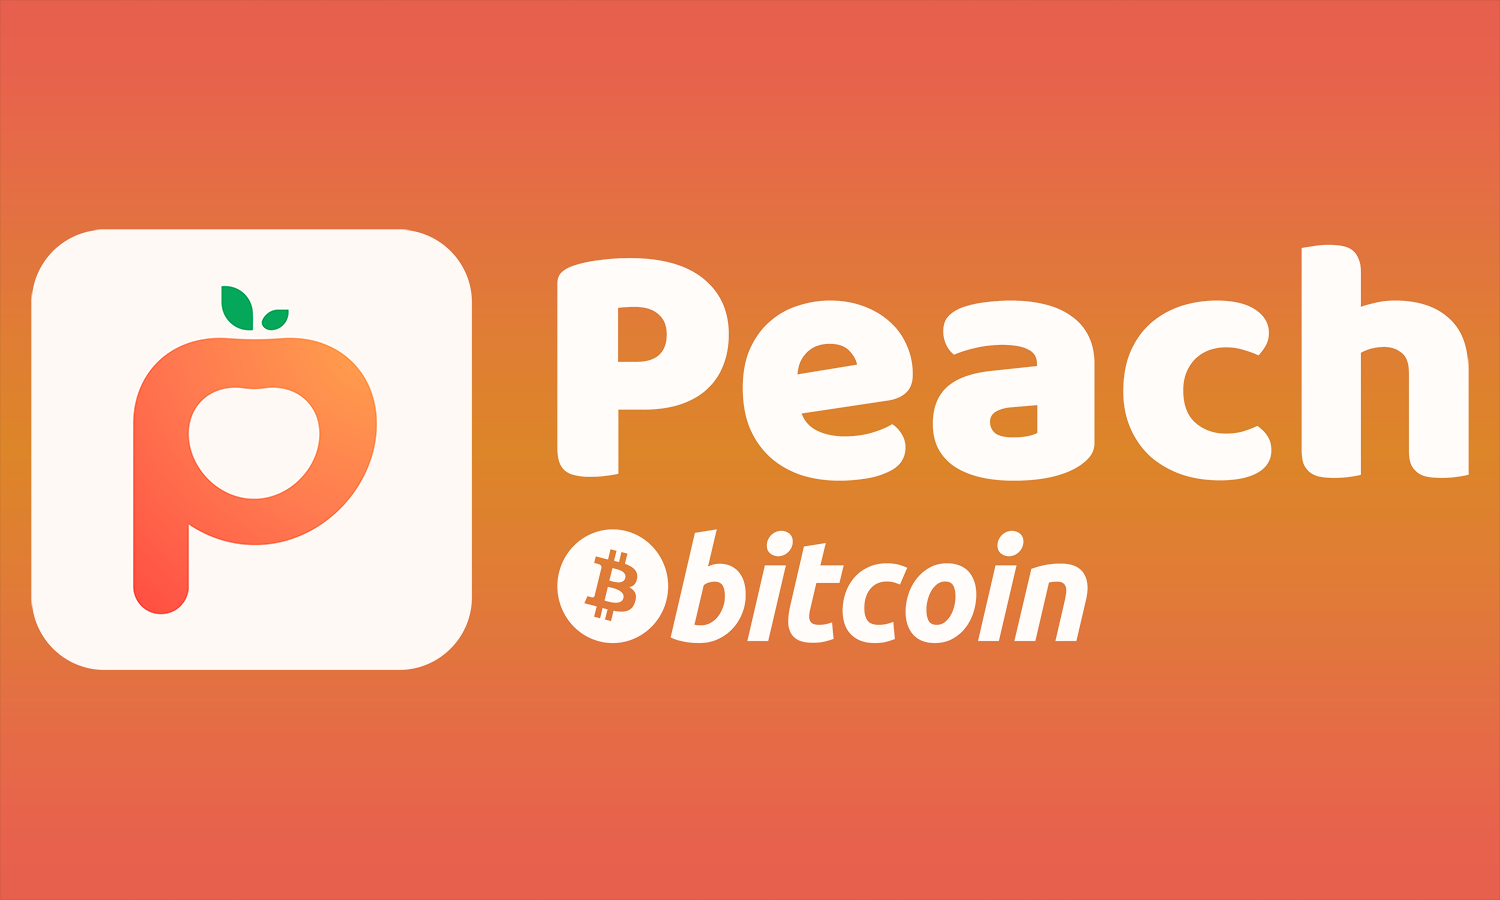 Peach Bitcoin Marks First Anniversary with Peach 0.3 Release